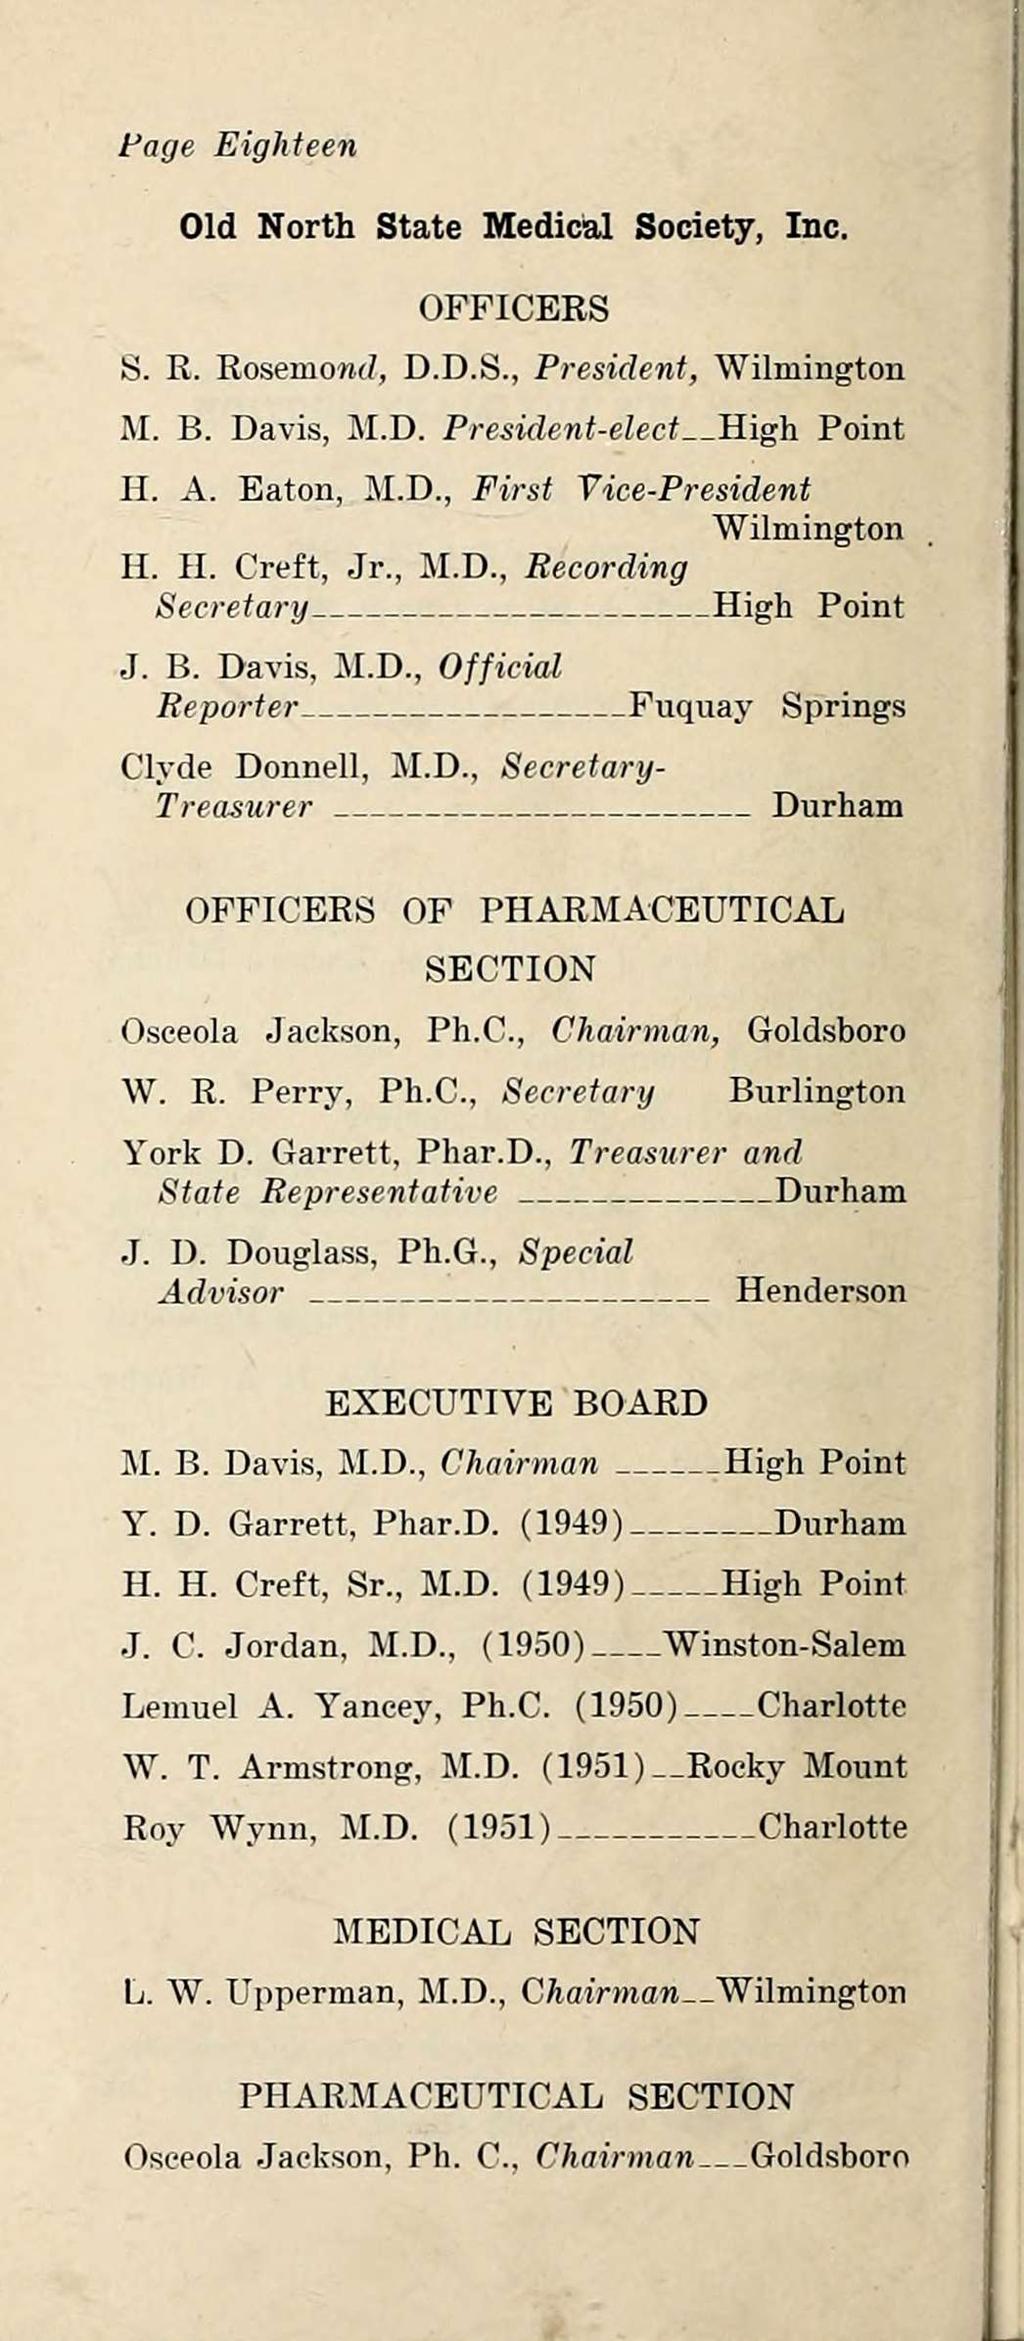 Fage Eighteen Old North State Medical Society, Inc. OFFICERS S. R. Rosemondj D.D.S., President, Wilmington M. B. Davis, M.D. President-elect High Point H. A. Eaton, M.D., First Vice-President Wilmington H.